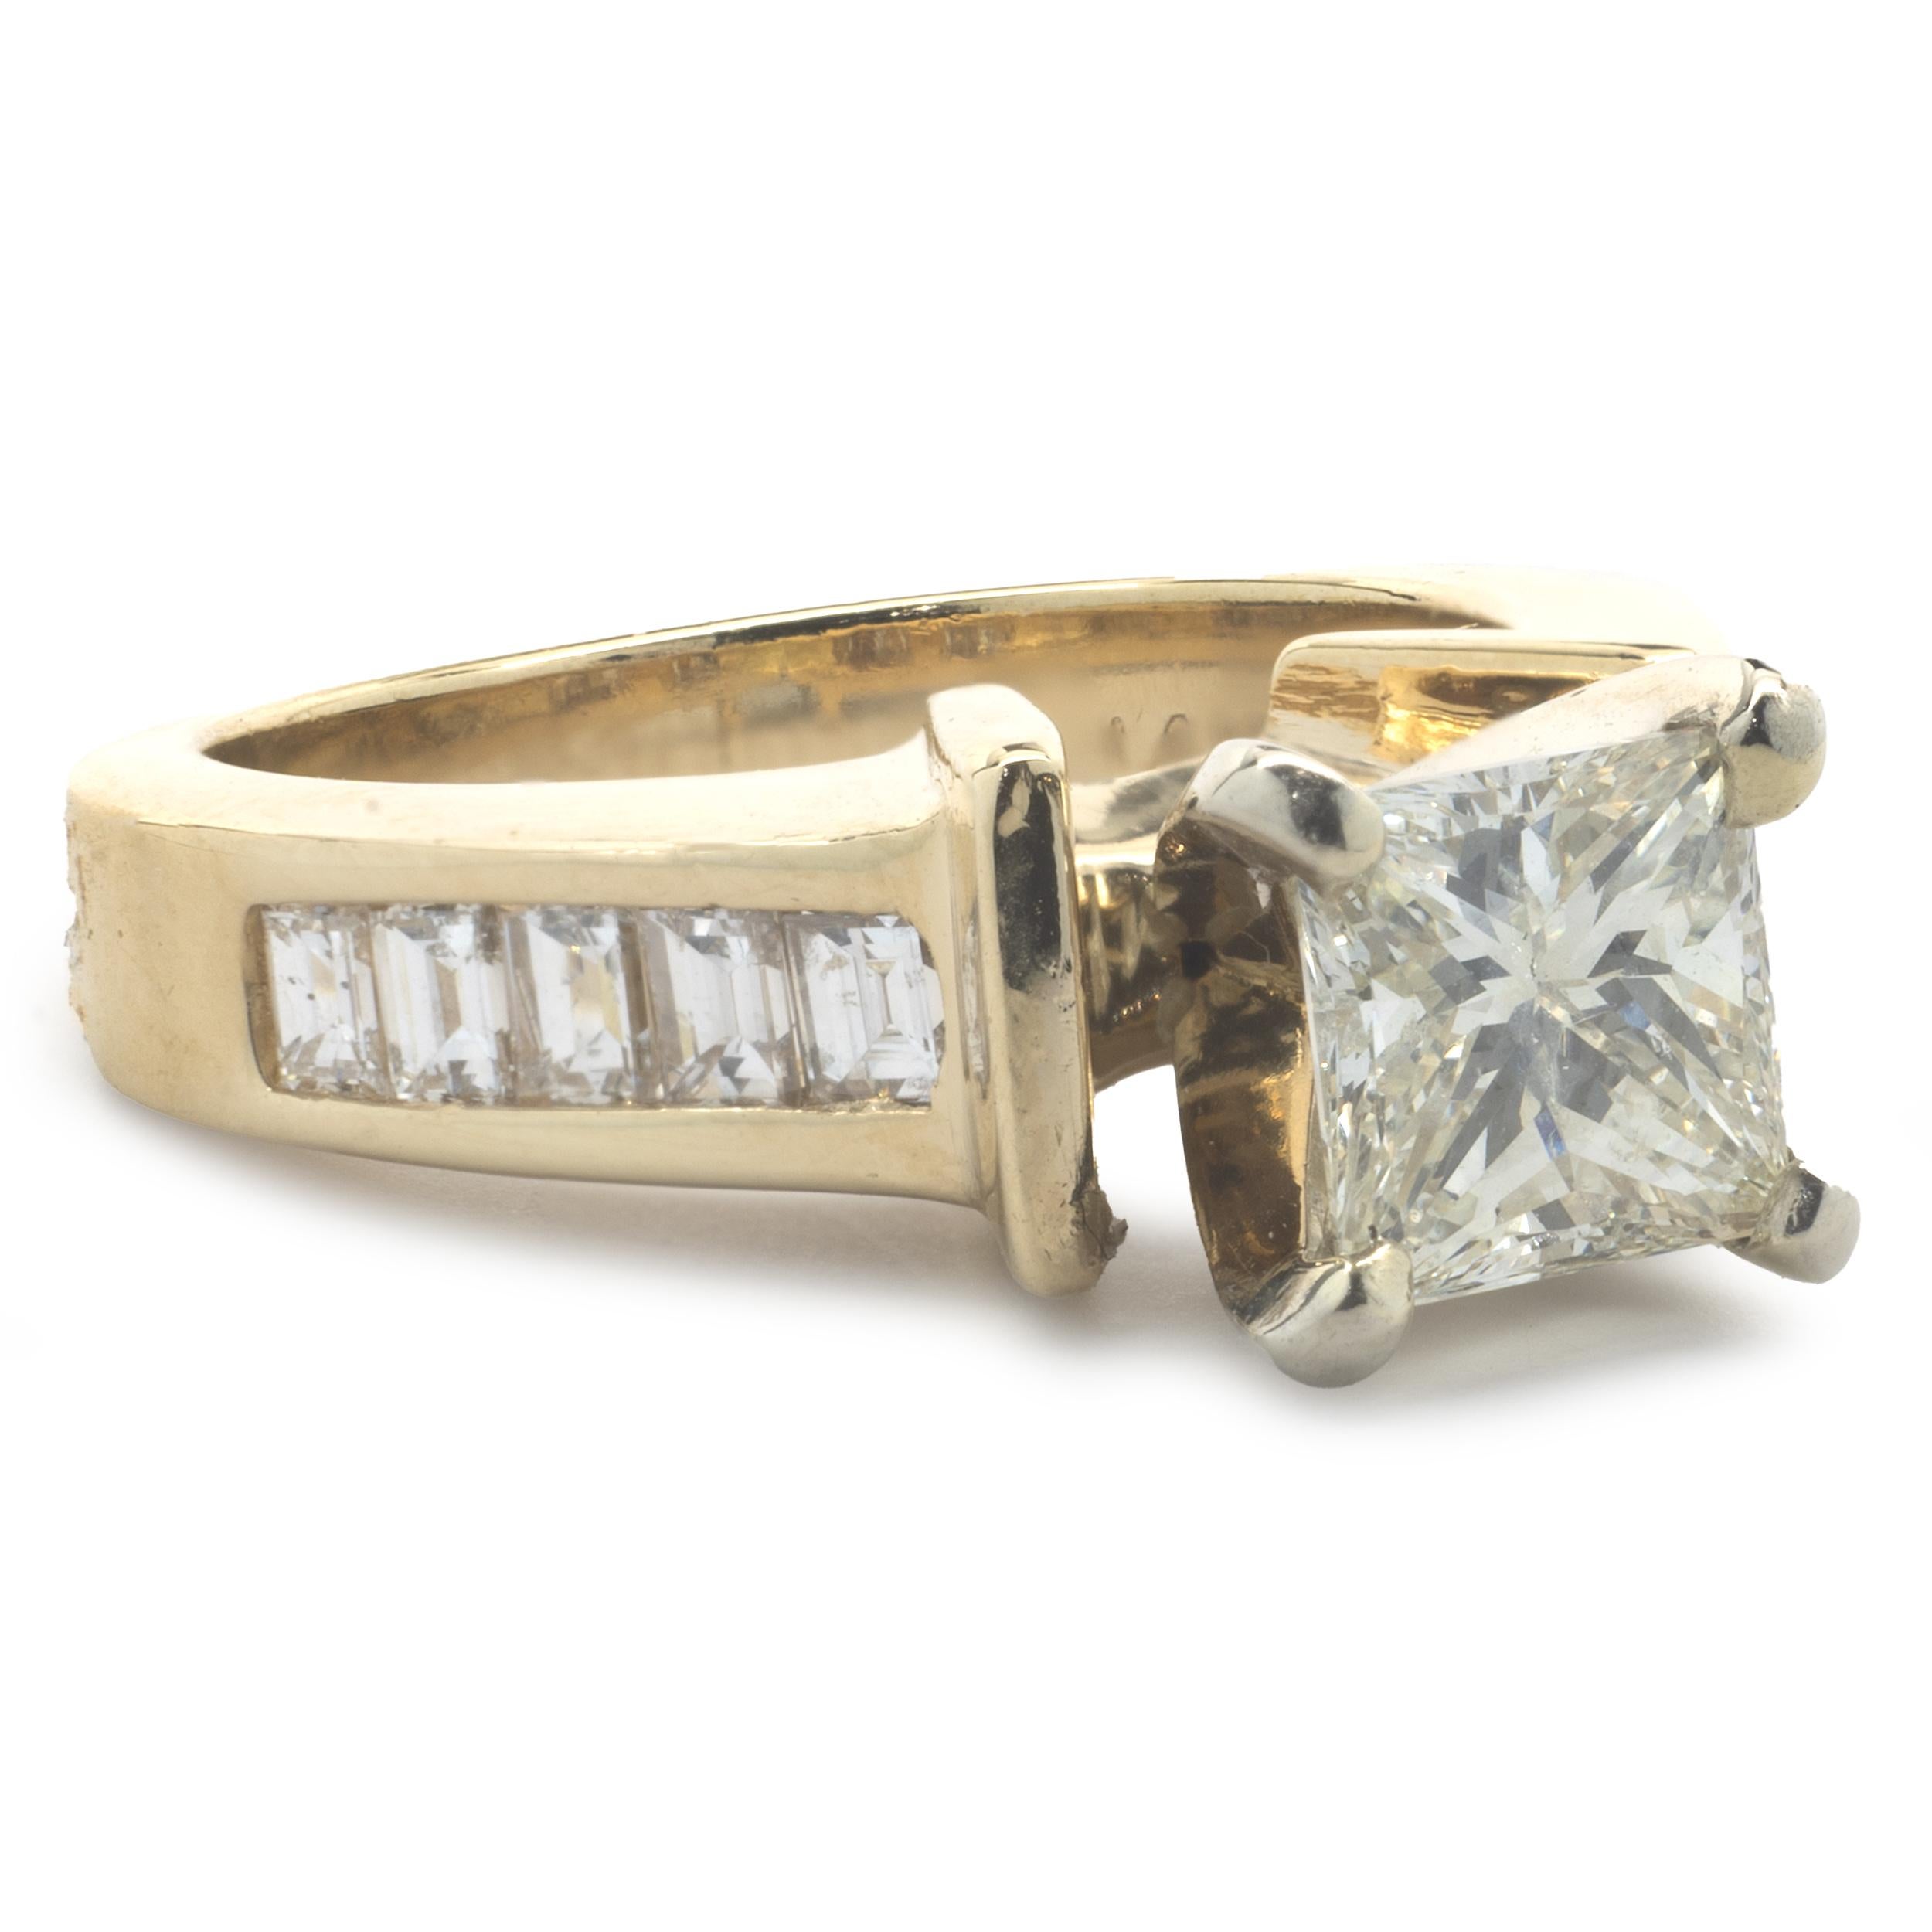 Designer: custom
Material: 14K yellow gold
Diamond: 1 princess cut = .85ct
Color: J
Clarity: SI1
Diamond: 10 baguette cut = .20cttw
Color: G
Clarity: SI1-2
Ring Size: 4.5 (please allow up to 2 additional business days for sizing